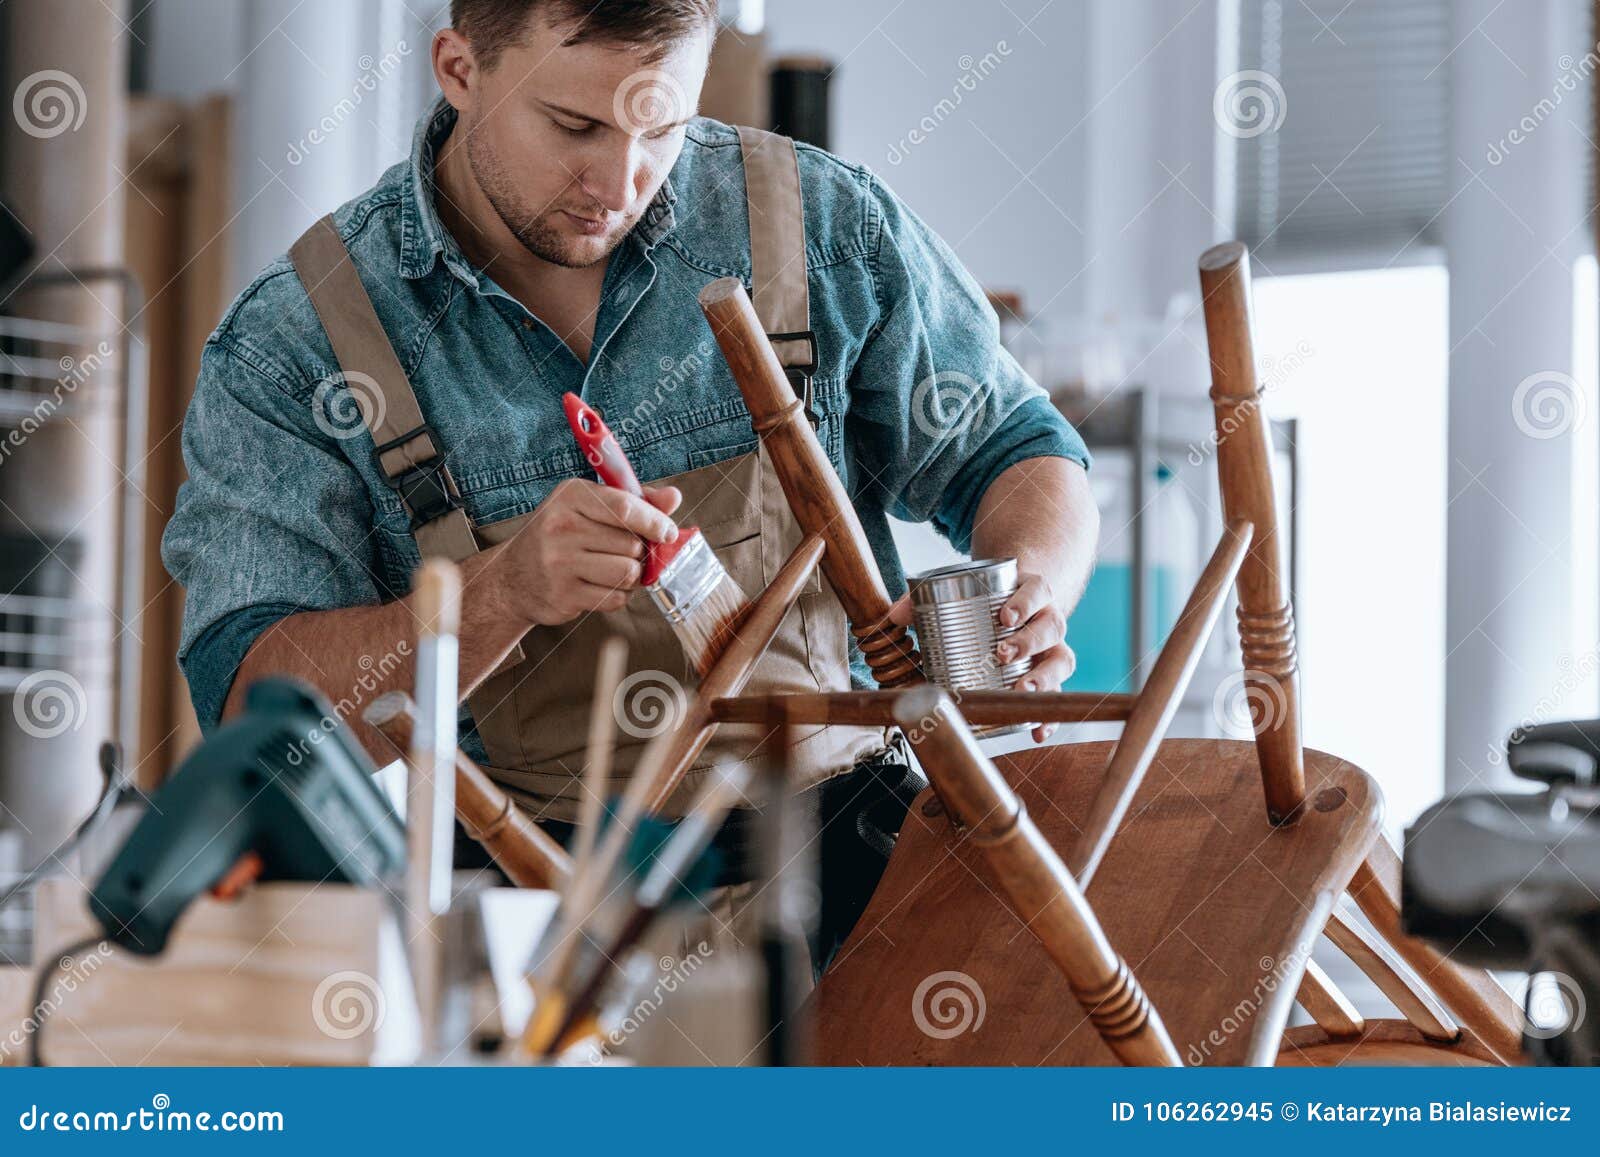 carpenter painting wooden chair